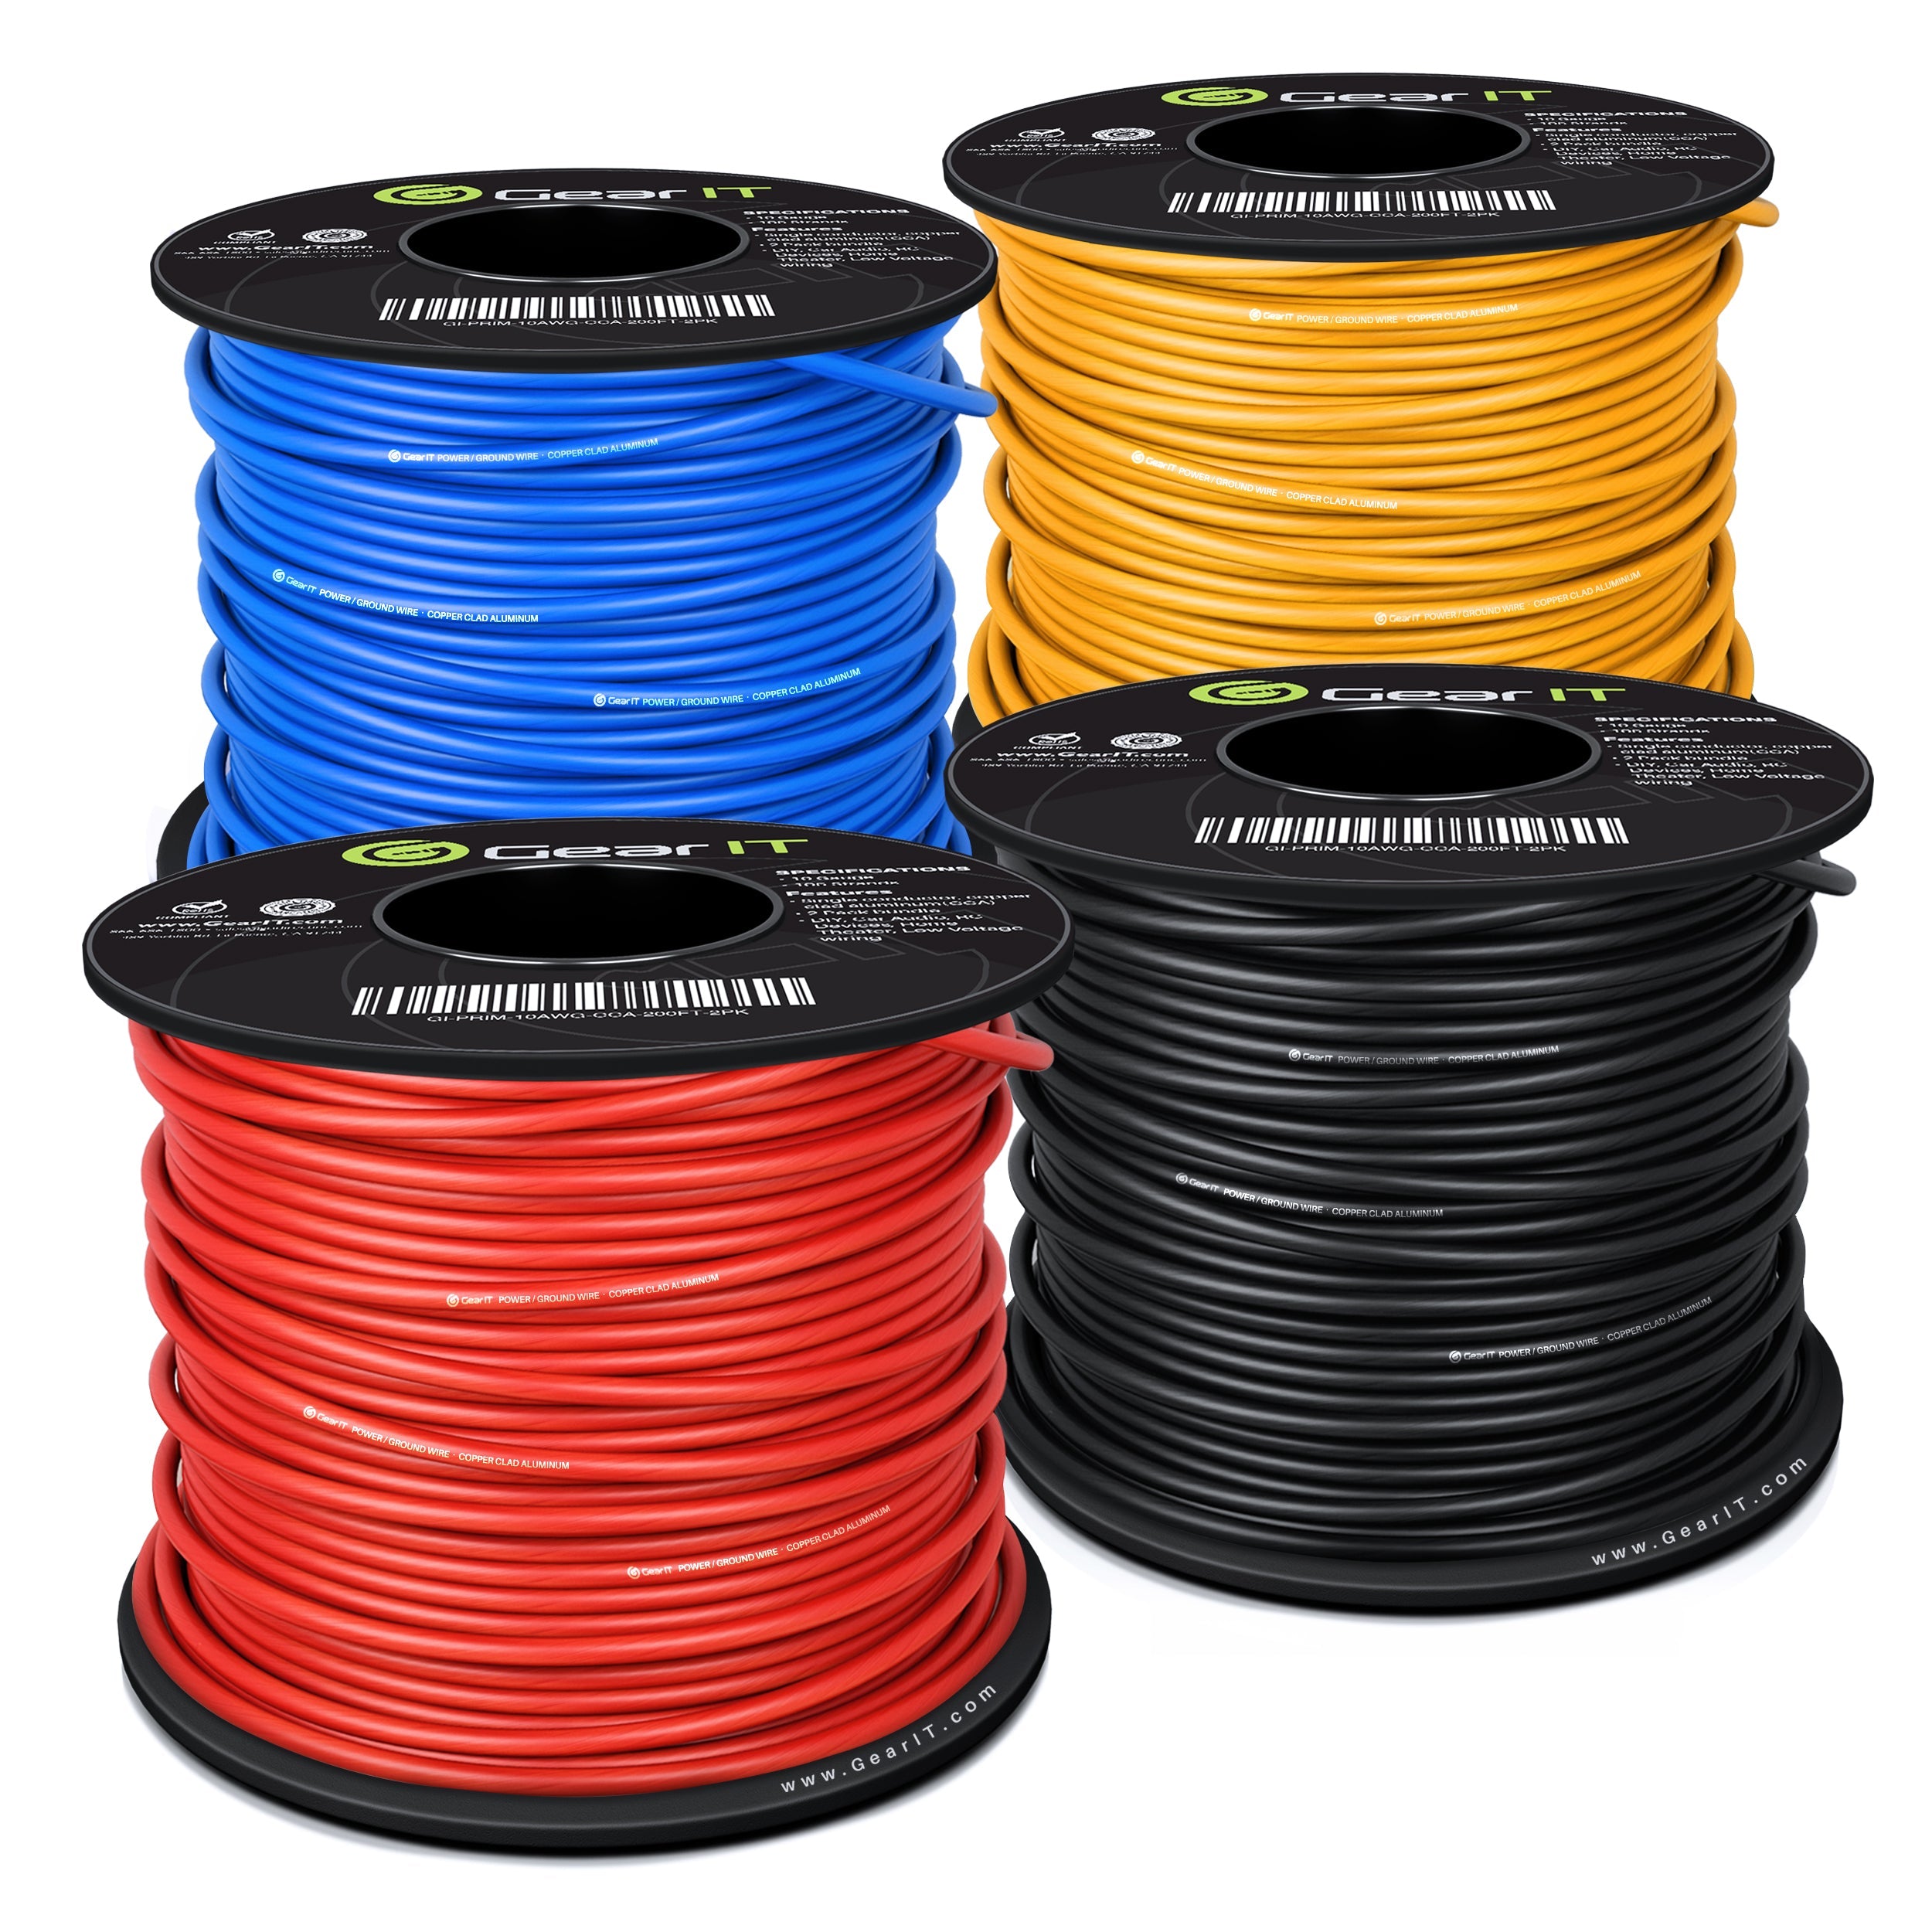 GS Power 14 Gauge Copper Clad Aluminum Low Voltage Primary Wire in 10 Color  Pack, 100 feet Roll (1000 feet Total) for 12V Automotive Harness Car Video